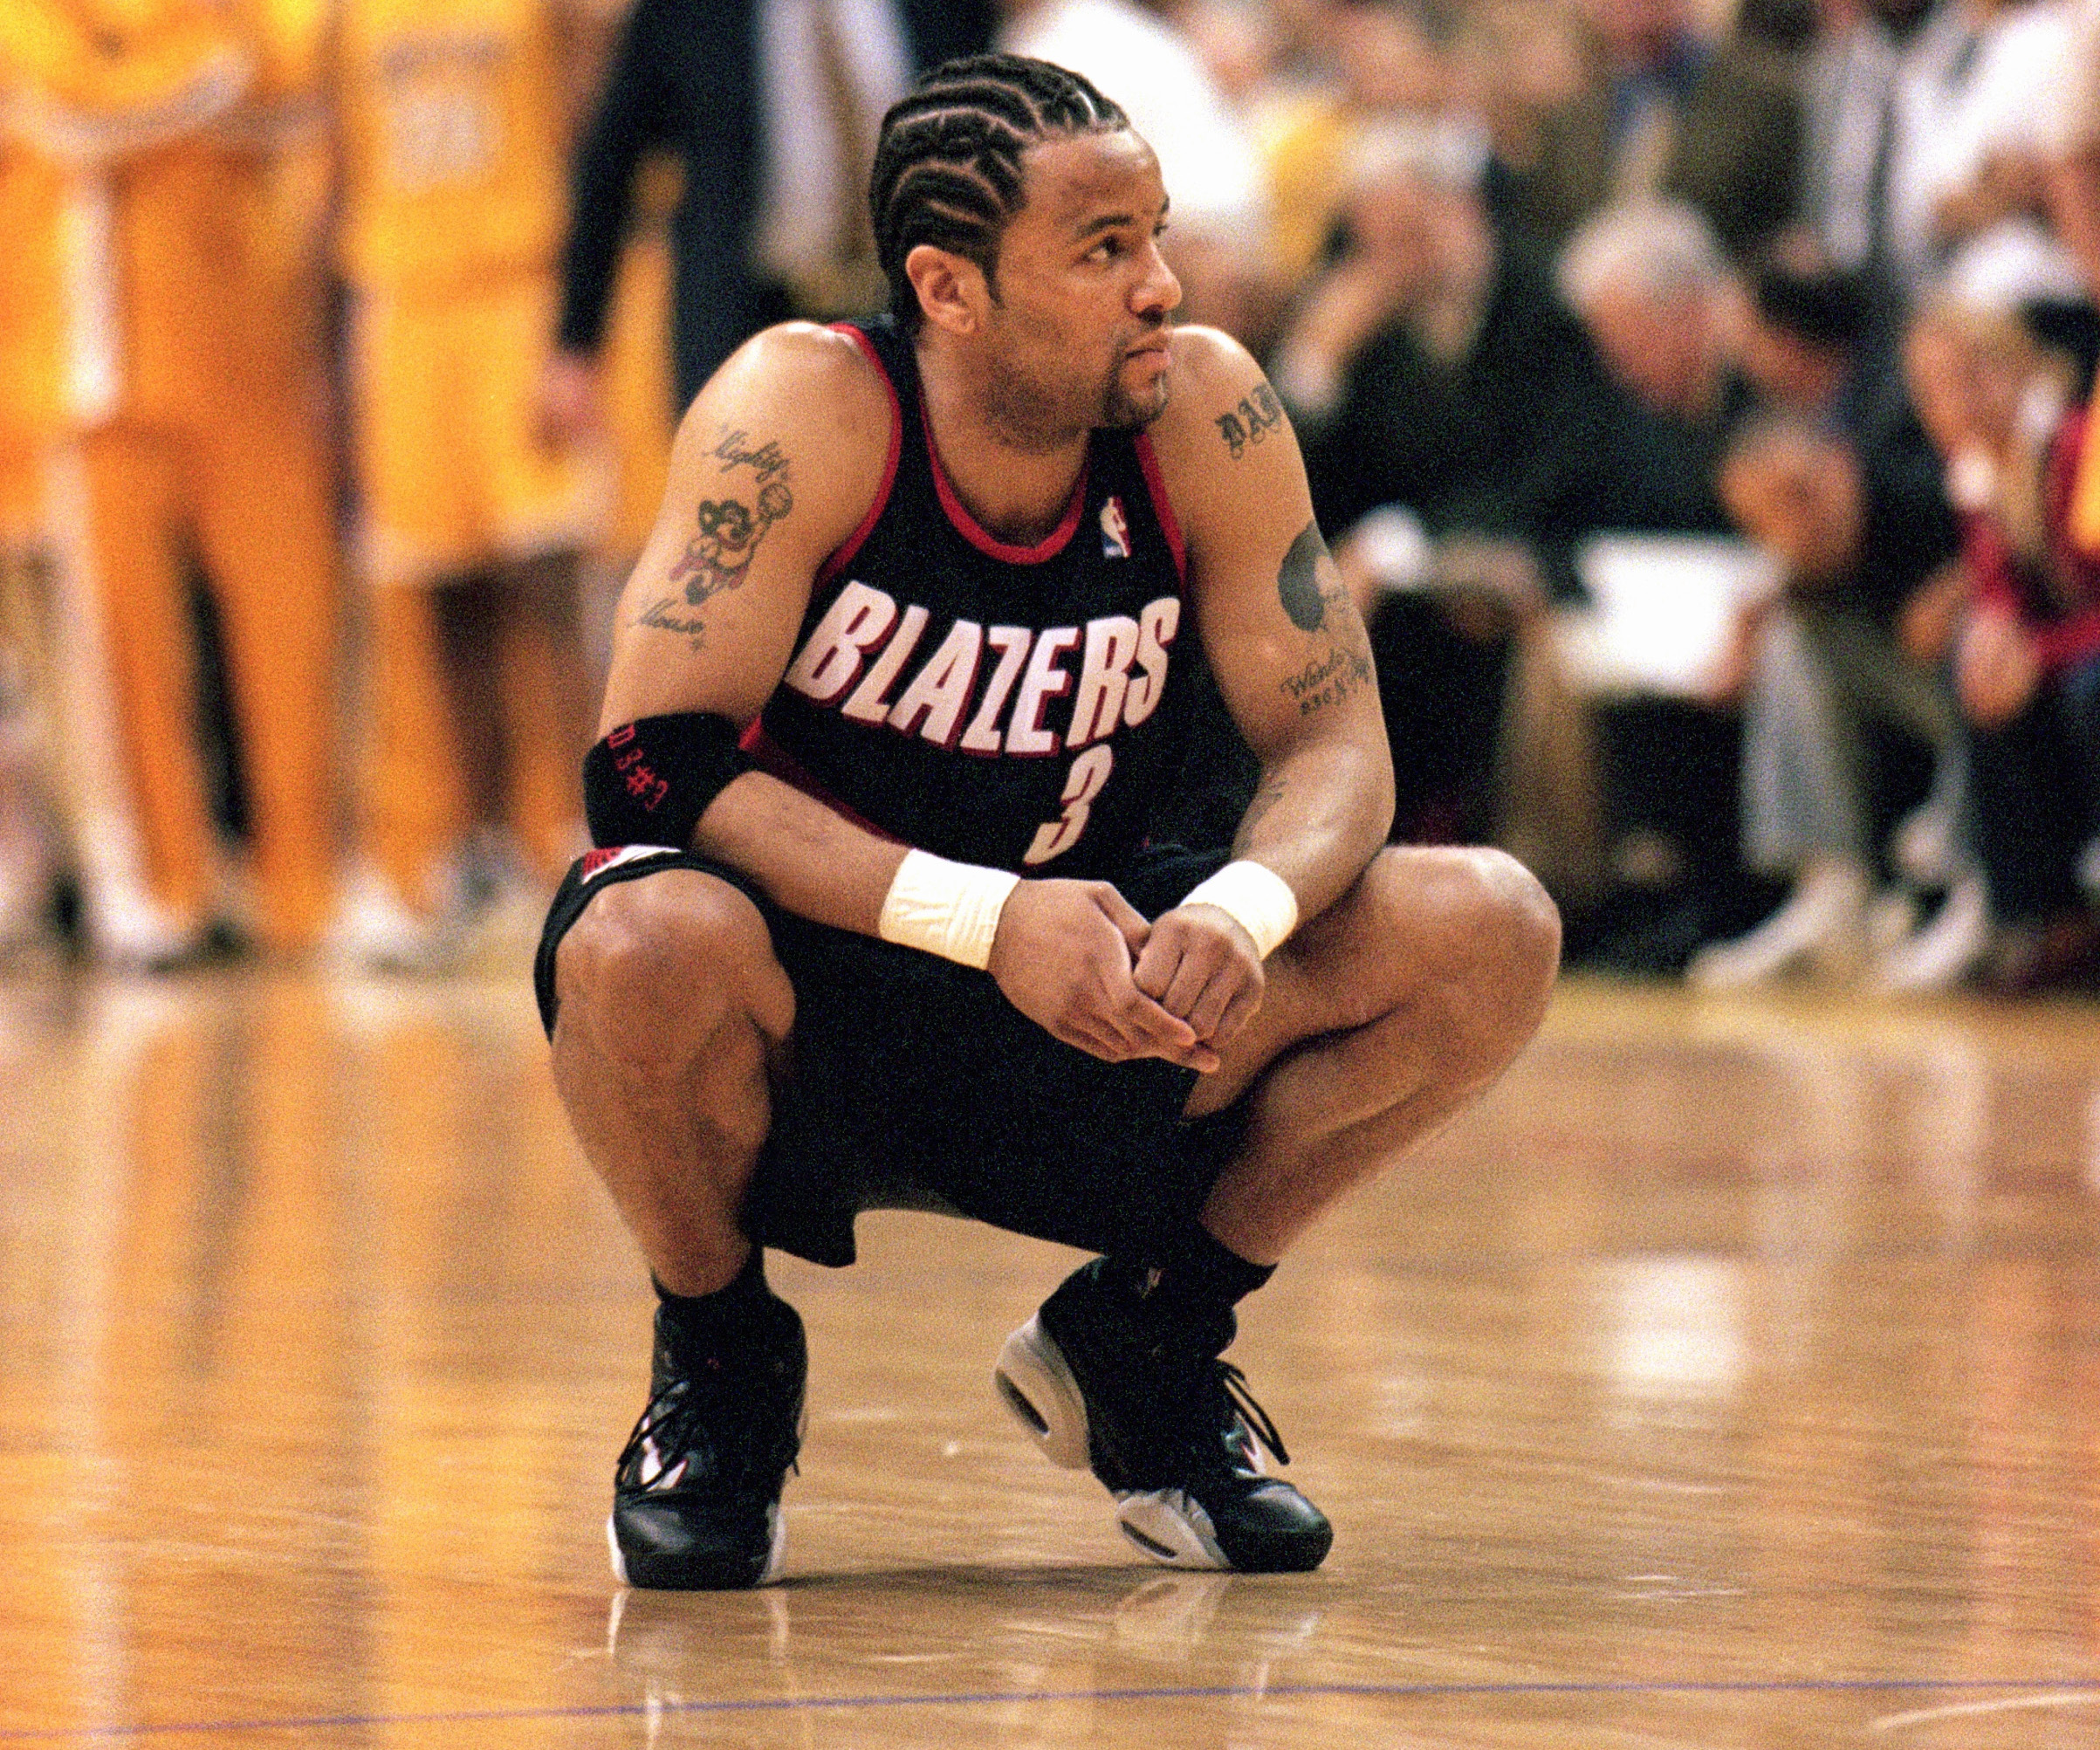 Ex-NBA player Brian Grant opens up about his Parkinson's disease